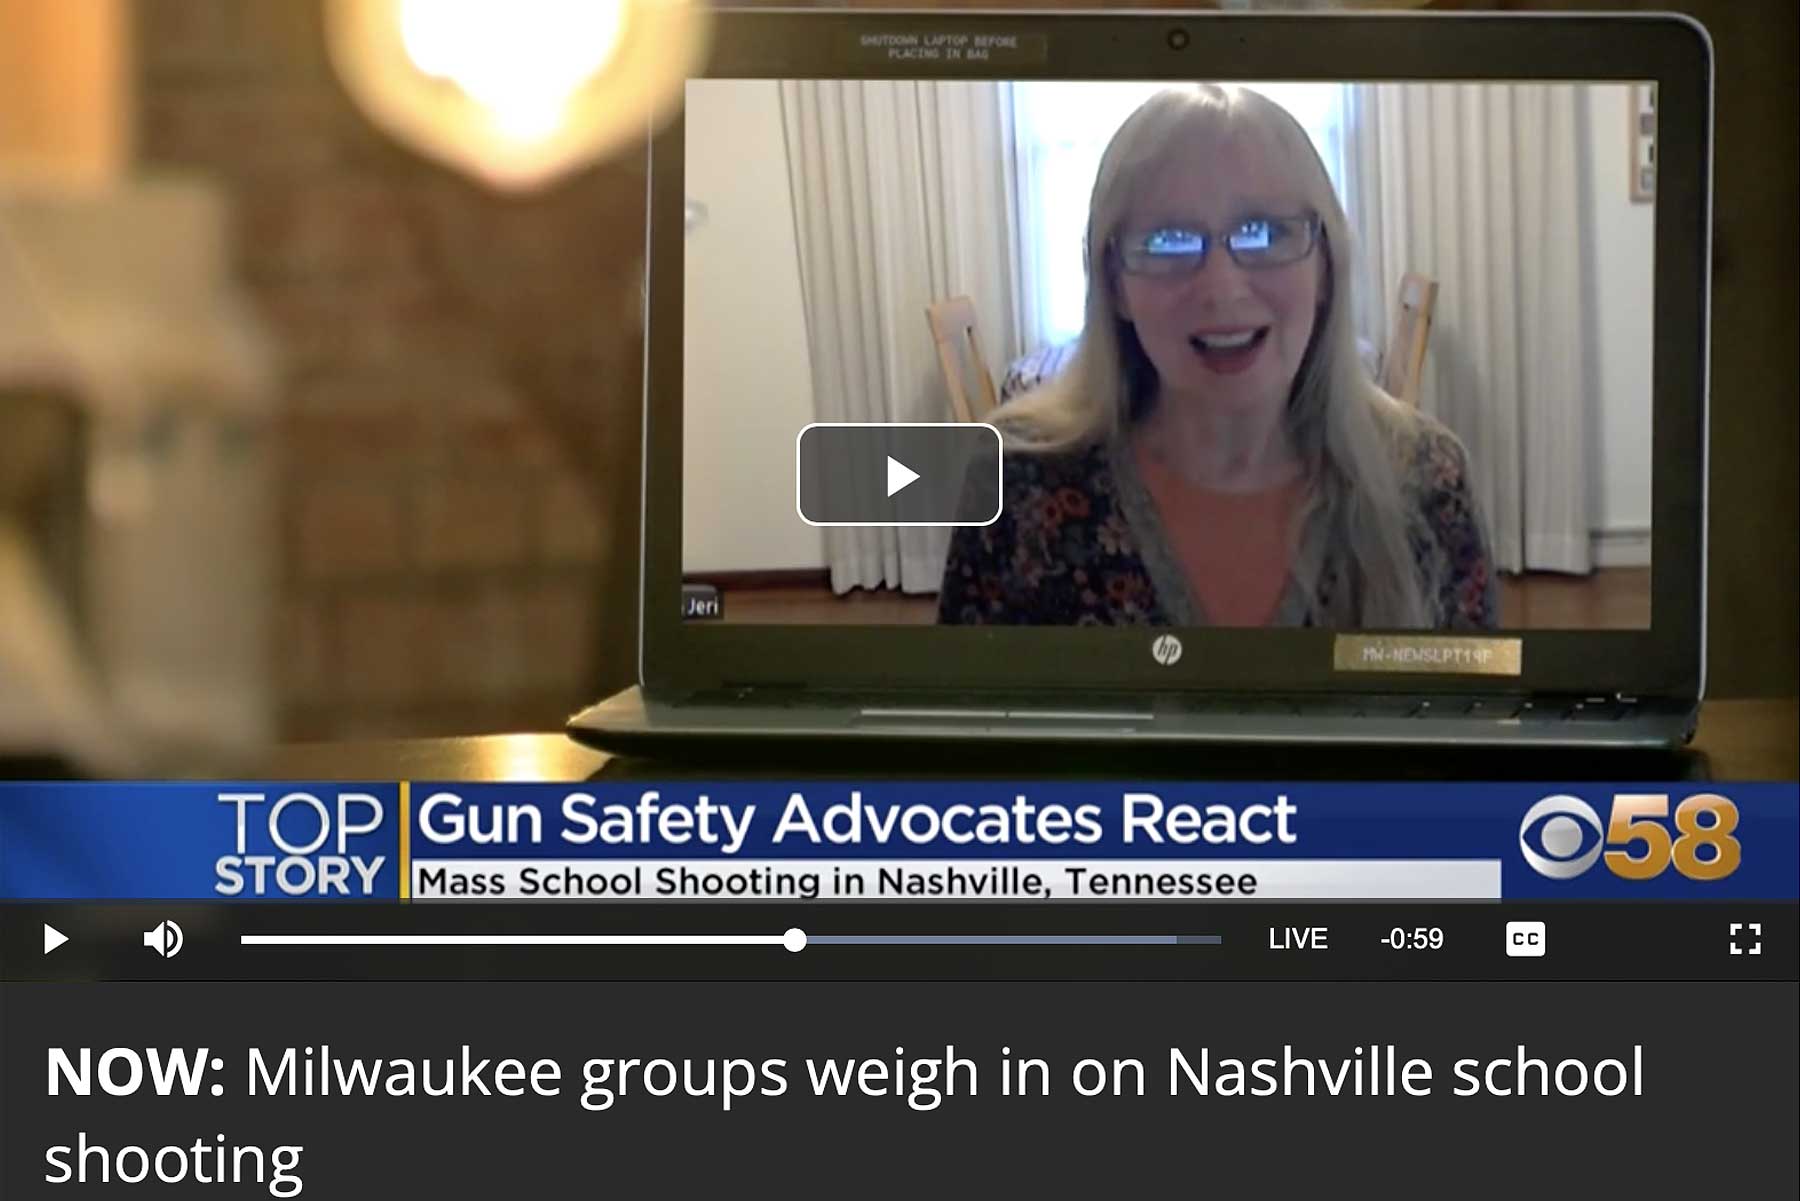 Jeri Bonavia, founder and executive director of the Wisconsin Anti-Violence Effort (WAVE), on the screen of a laptop being interviewed about the mass shooting at a school in Nashville